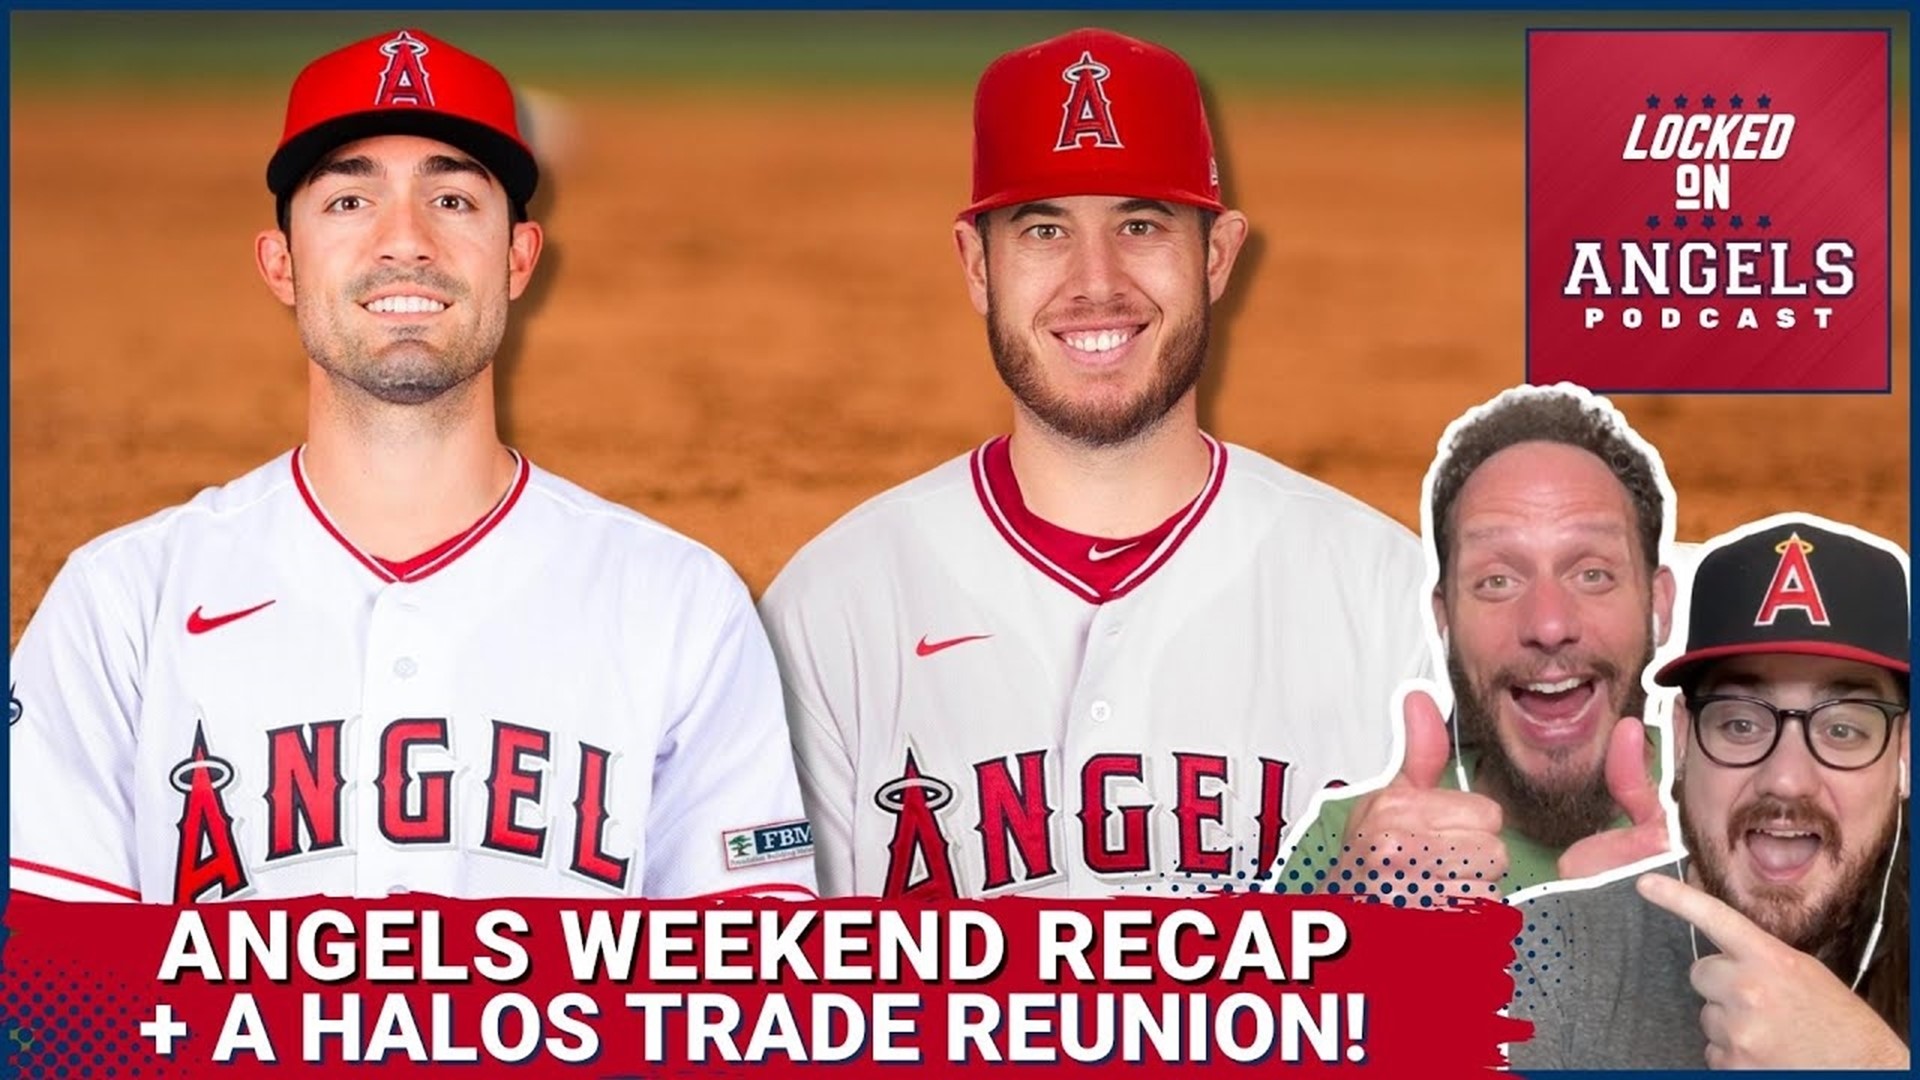 The Los Angeles Angels have acquired Randal Grichuk and C.J. Cron